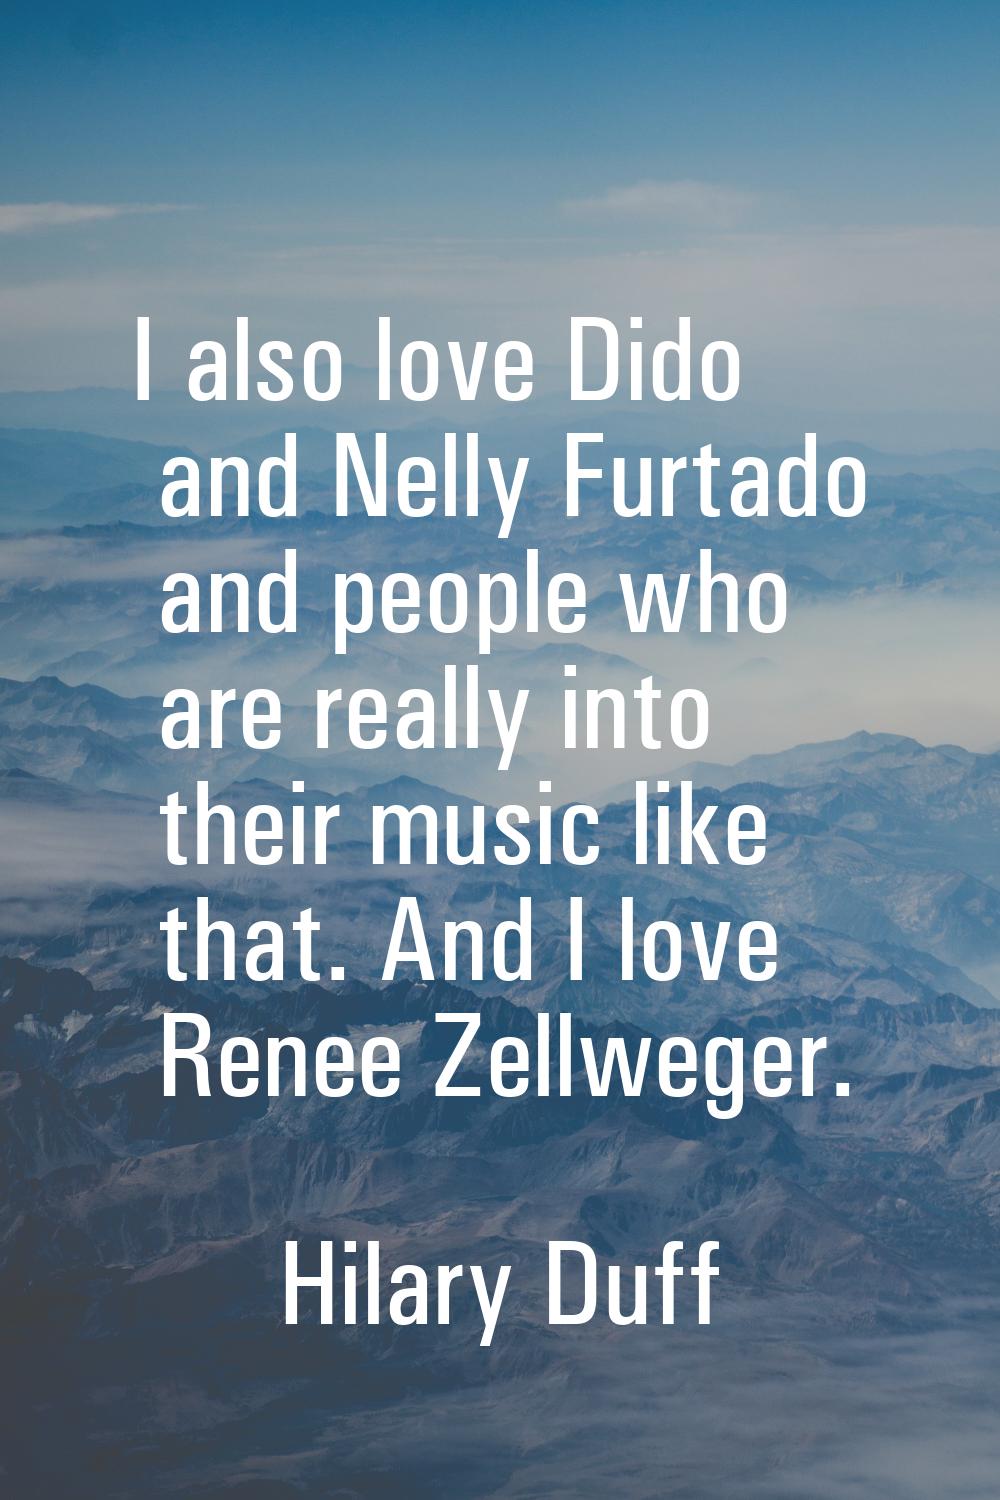 I also love Dido and Nelly Furtado and people who are really into their music like that. And I love